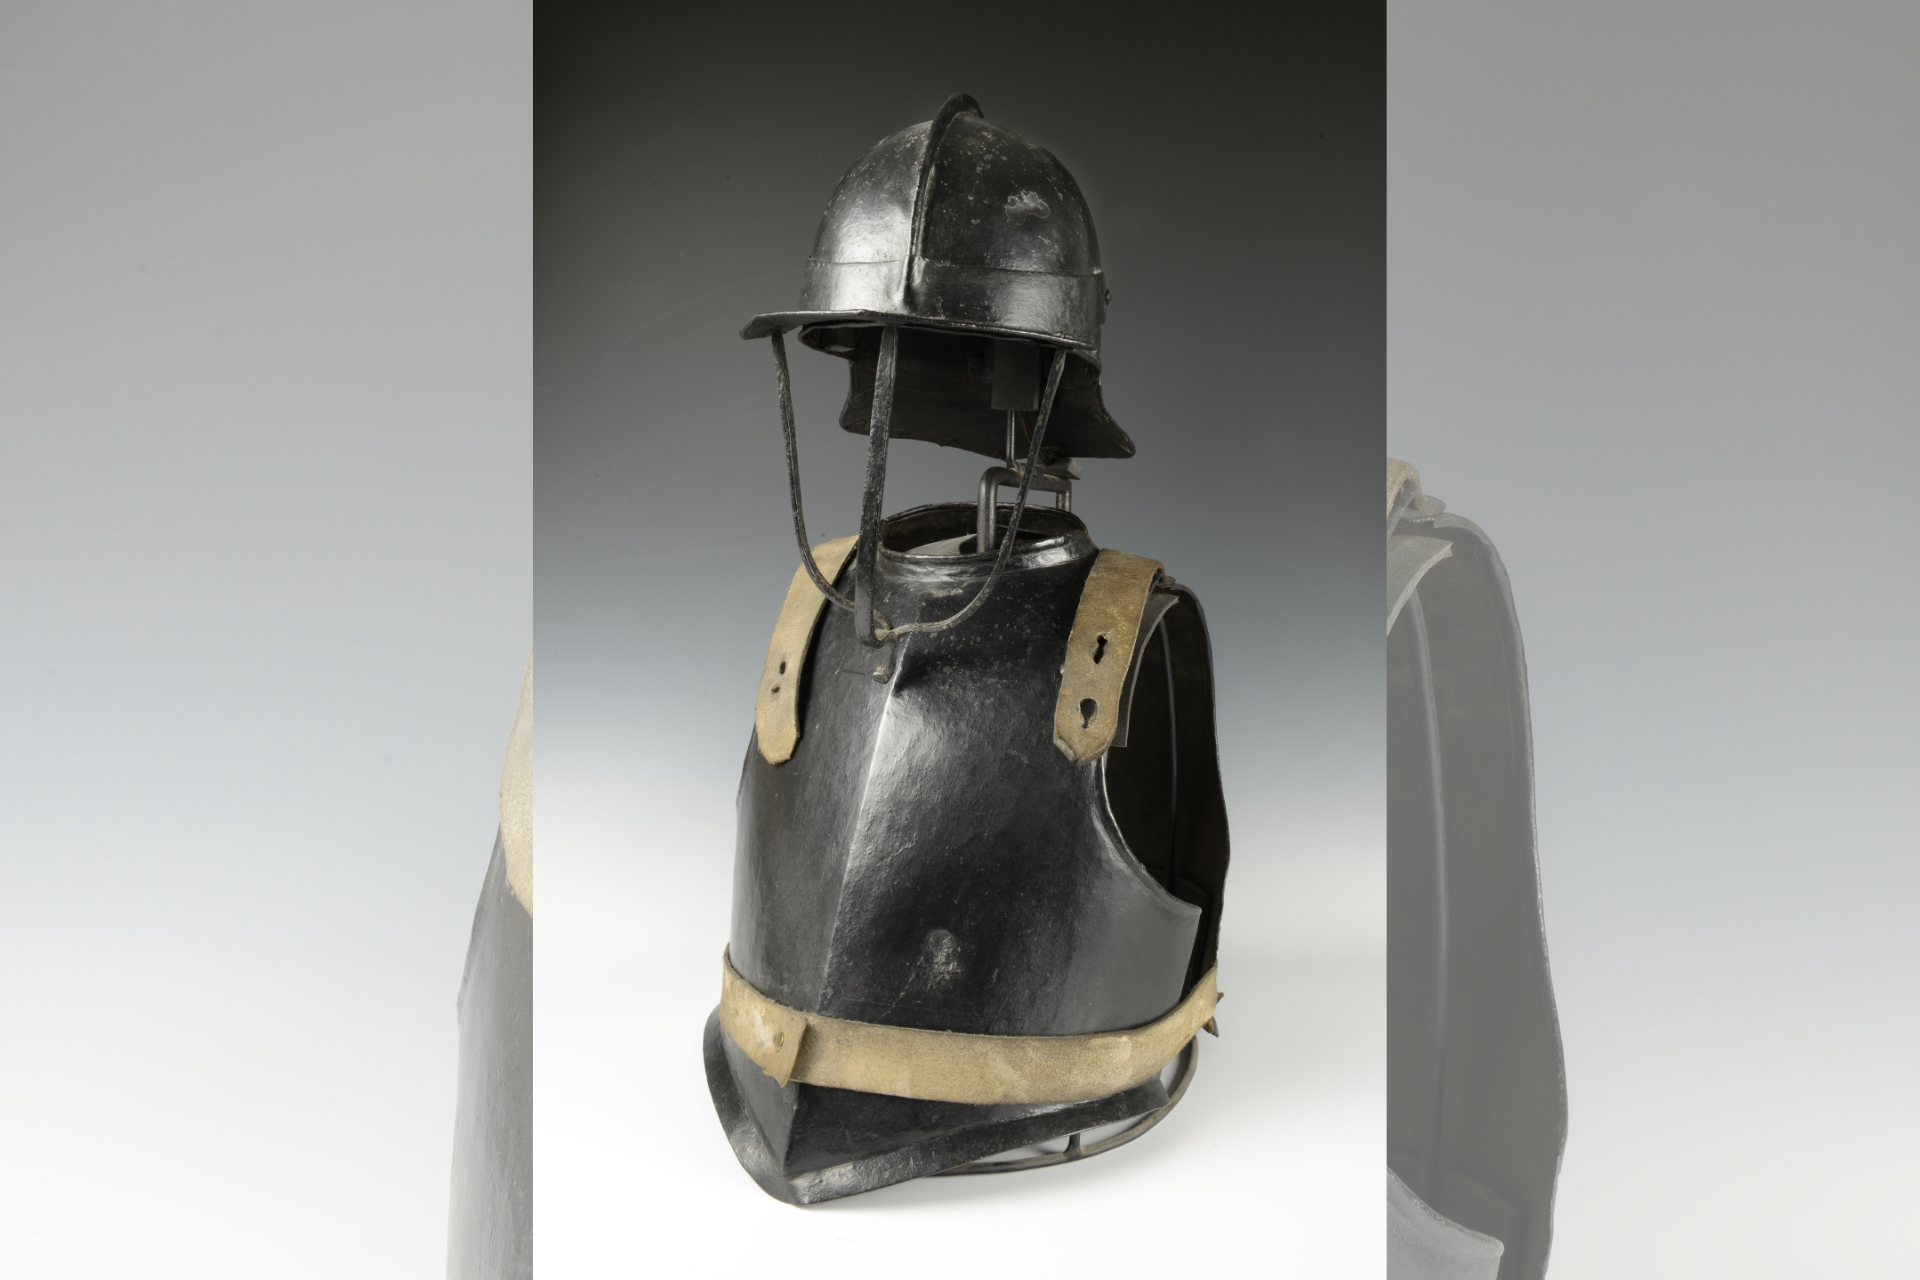 Close-up image of the Cromwellian armour.